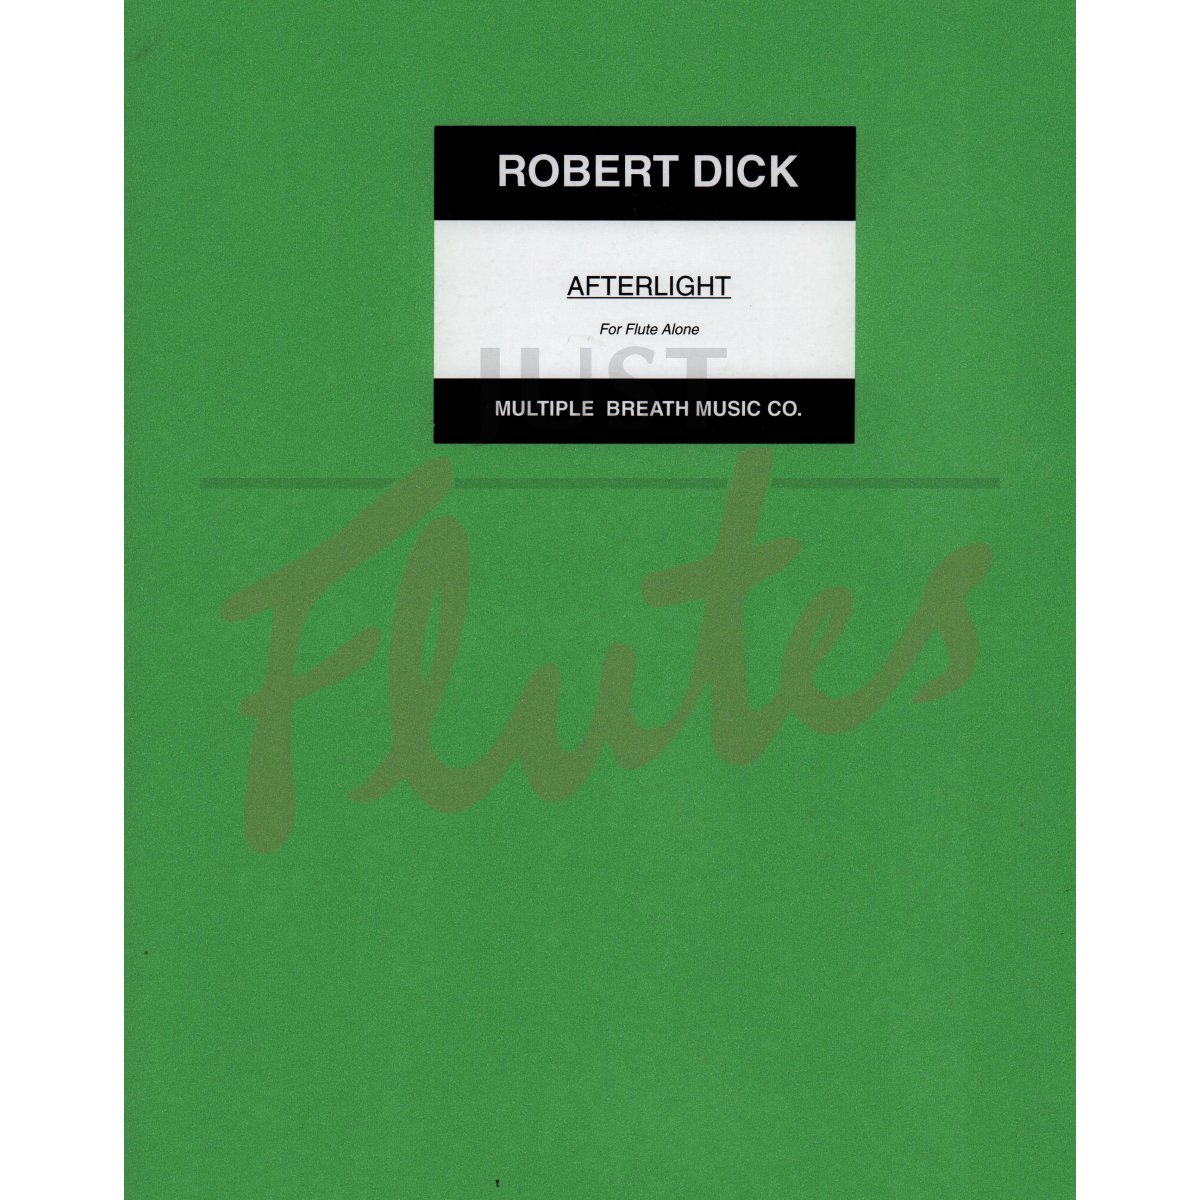 Dick - Afterlight - Flute Solo Multiple Breath Music 40123MBM